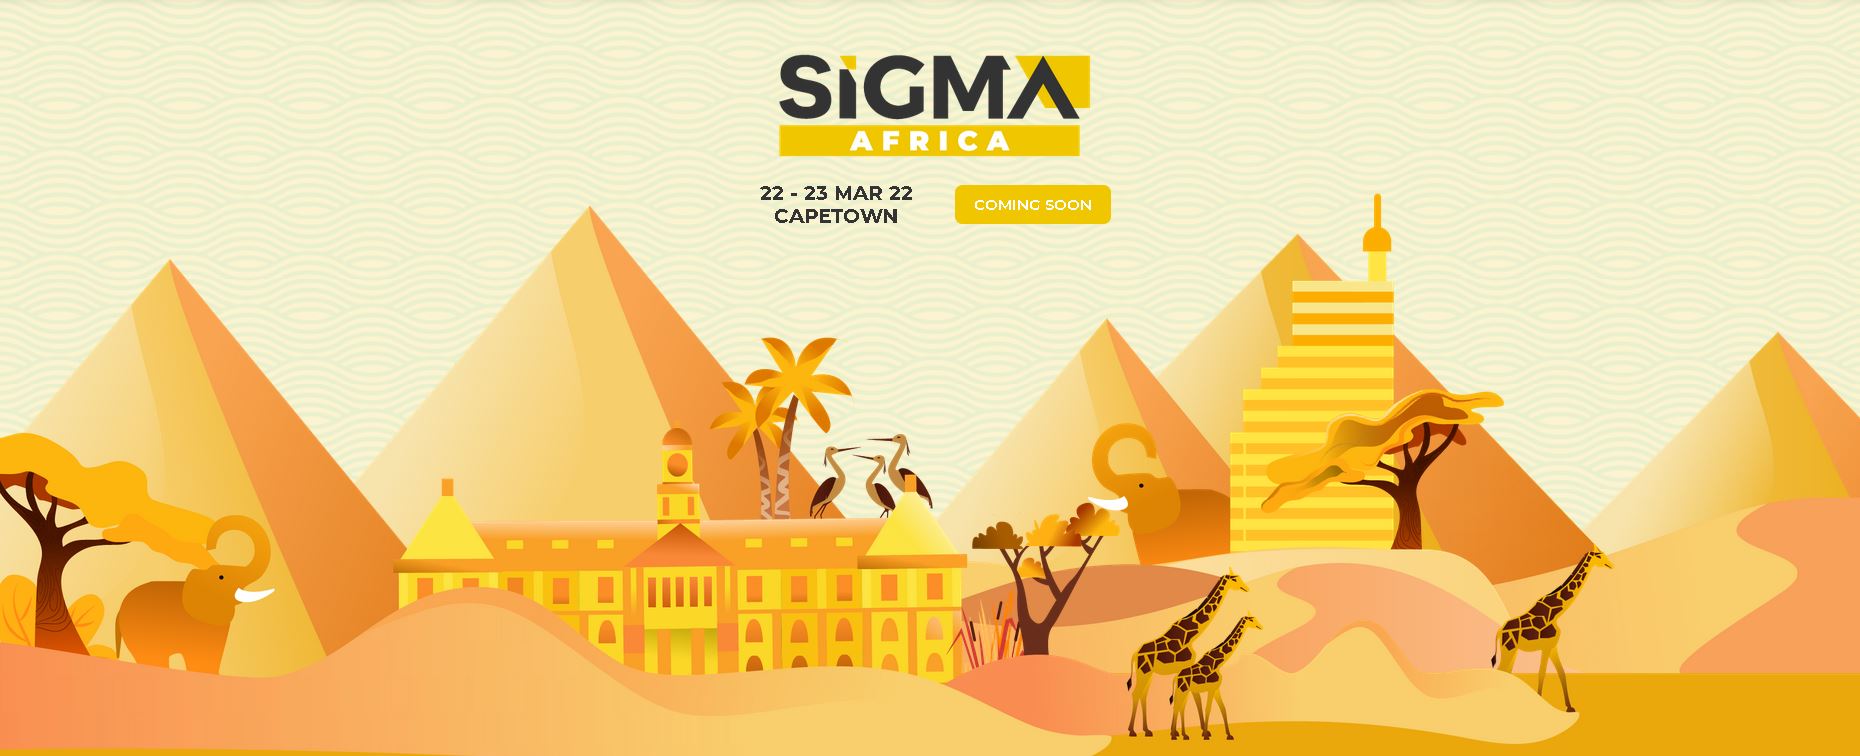 SIGMA AFRICA organized by SiGMA Group